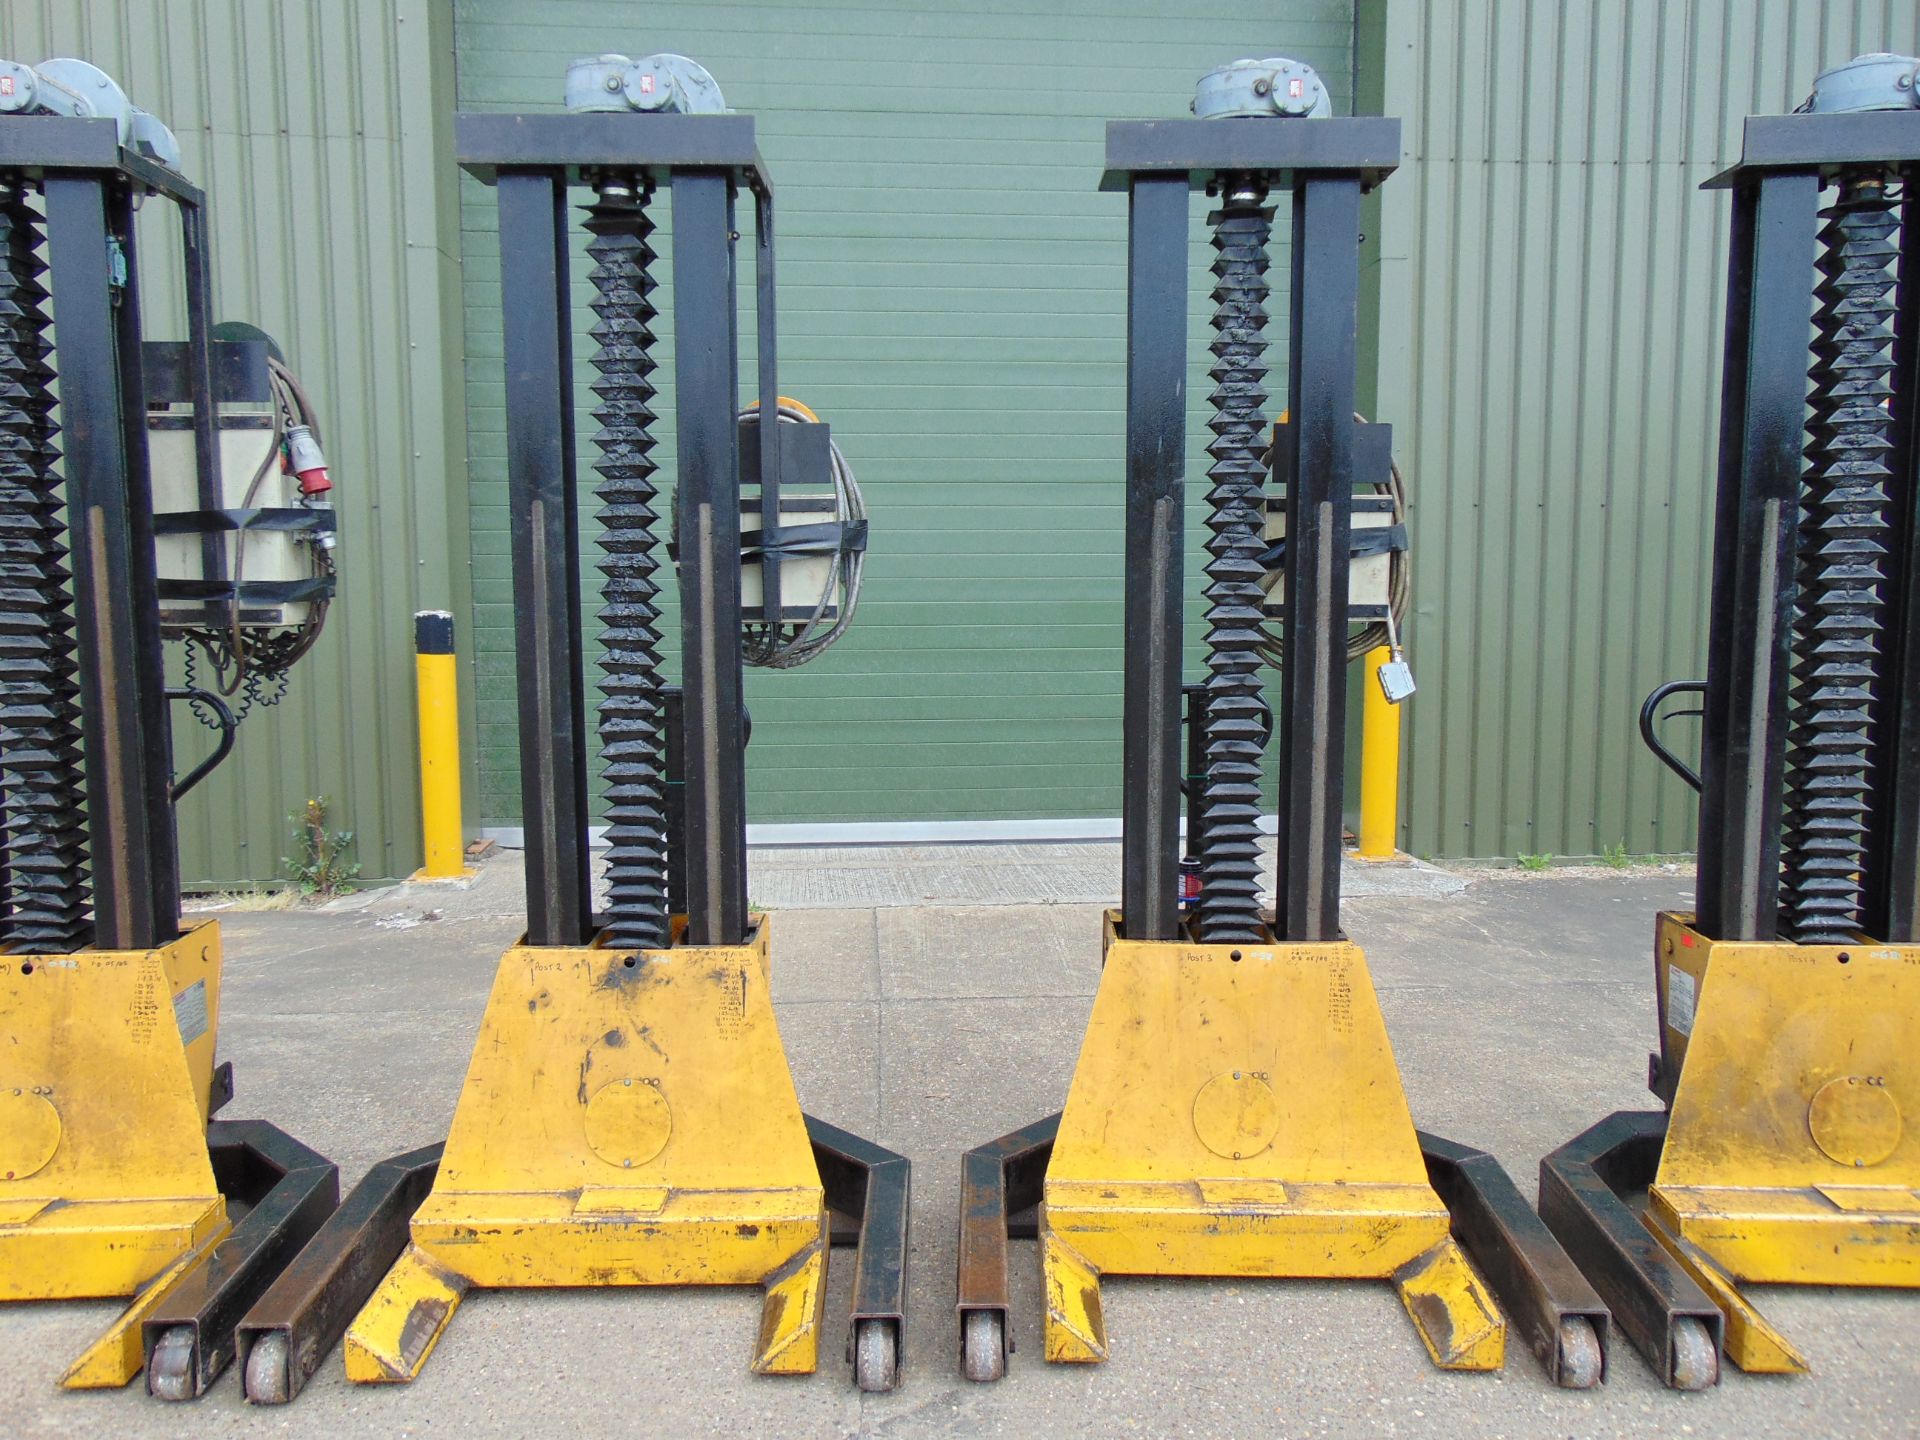 Set of 6 Somers 5T Mobile Column Vehicle Lifts (5T Per Column) - Image 3 of 19